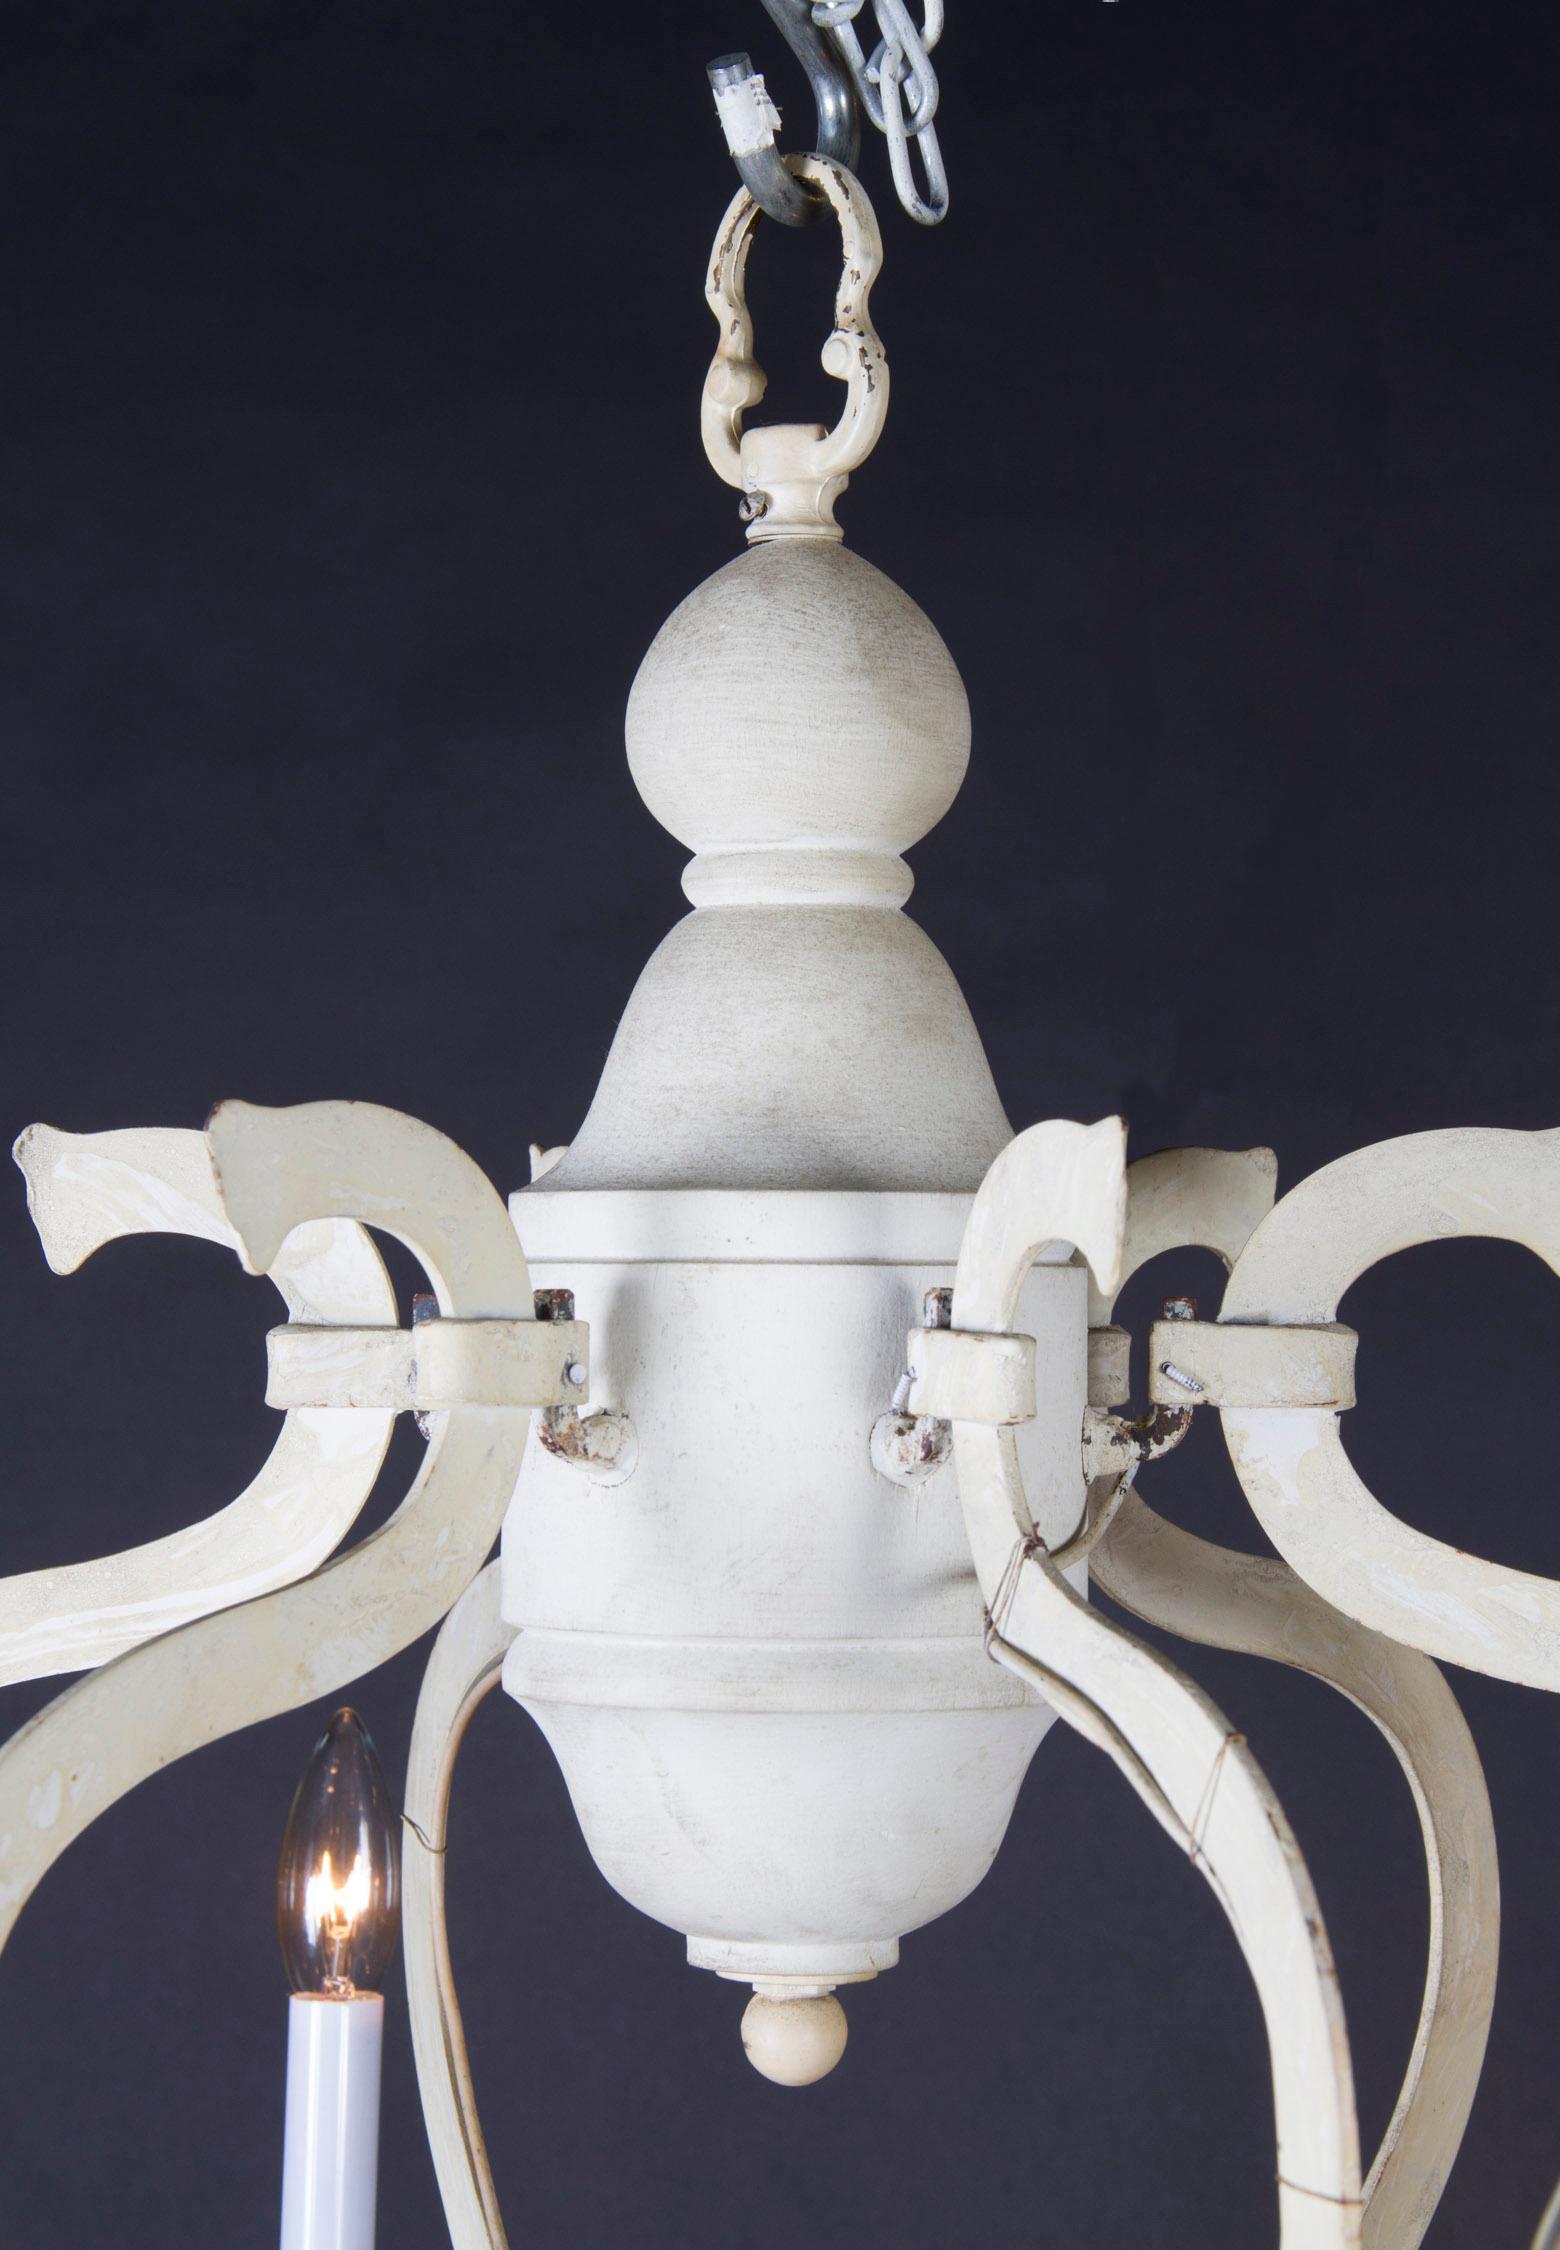 White Italian Chandelier made of Carved Wood and Painted Iron, Mid-20th Century For Sale 3